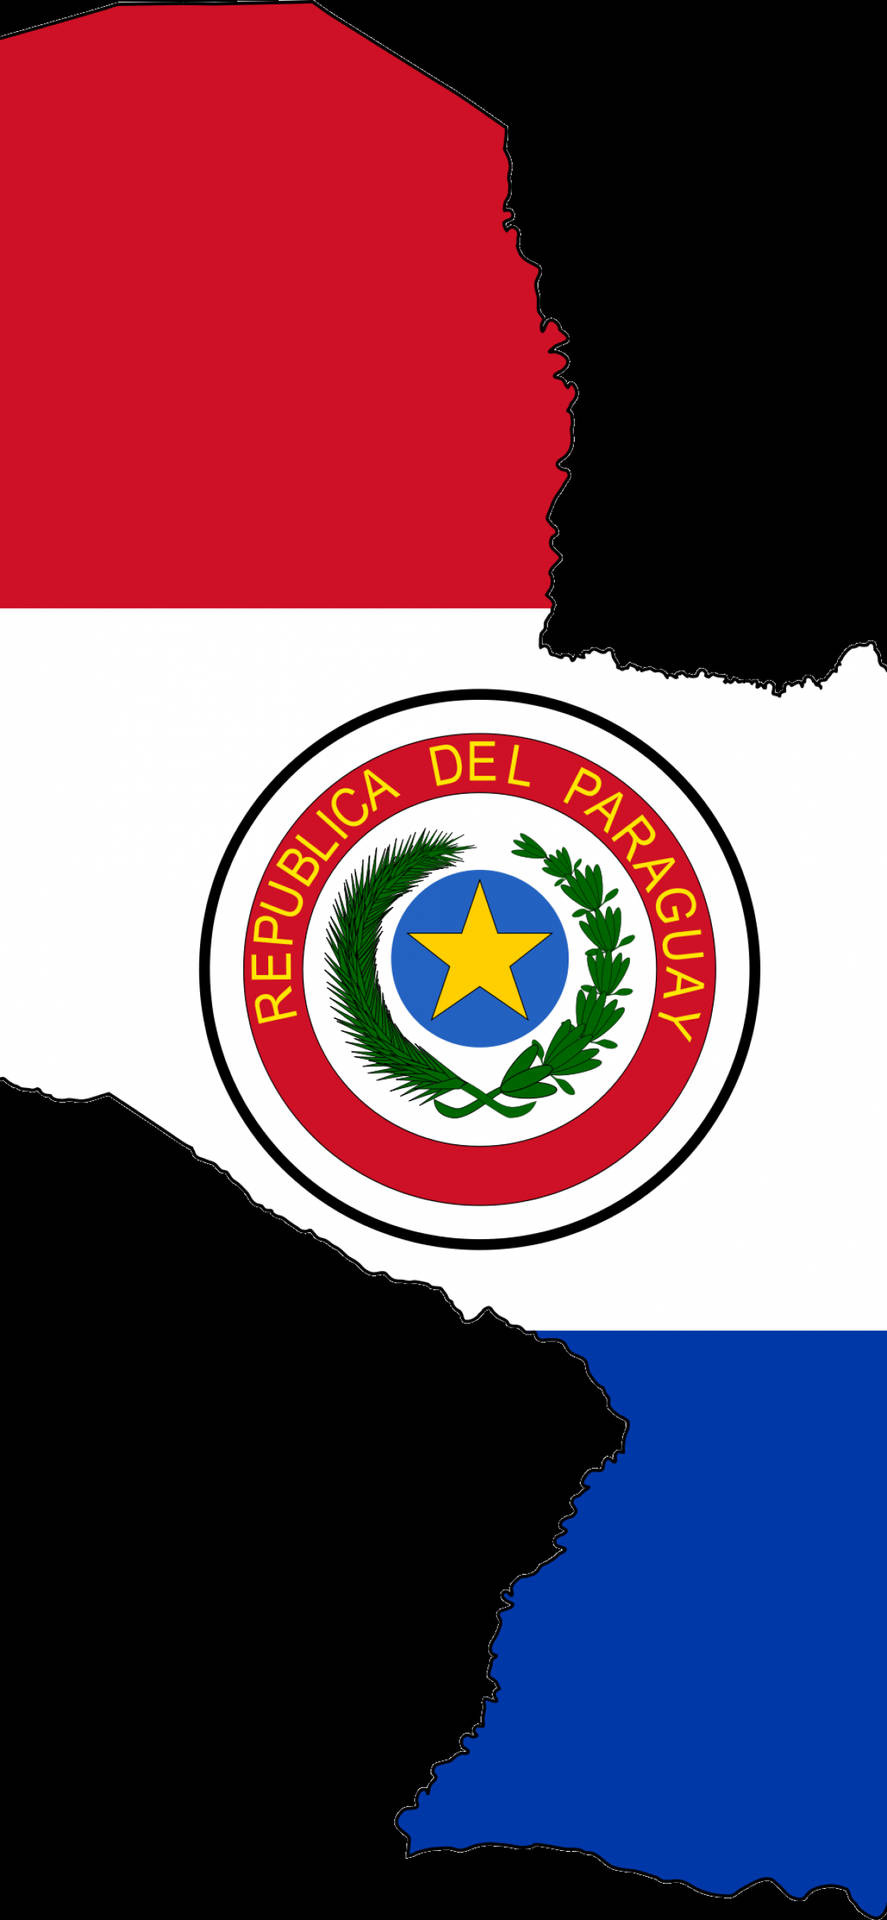 Paraguay Country Seal Wallpaper